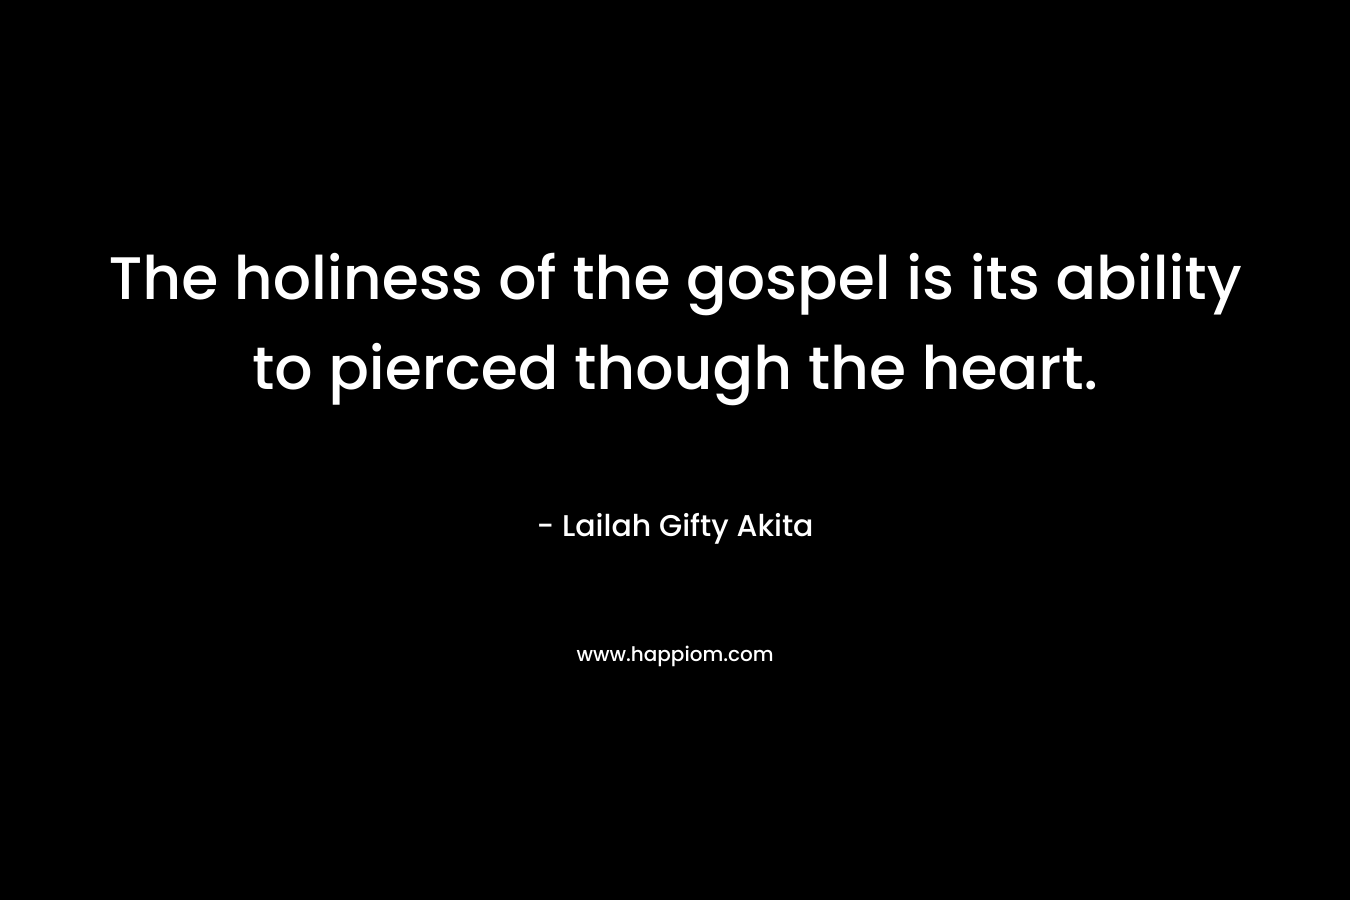 The holiness of the gospel is its ability to pierced though the heart. – Lailah Gifty Akita